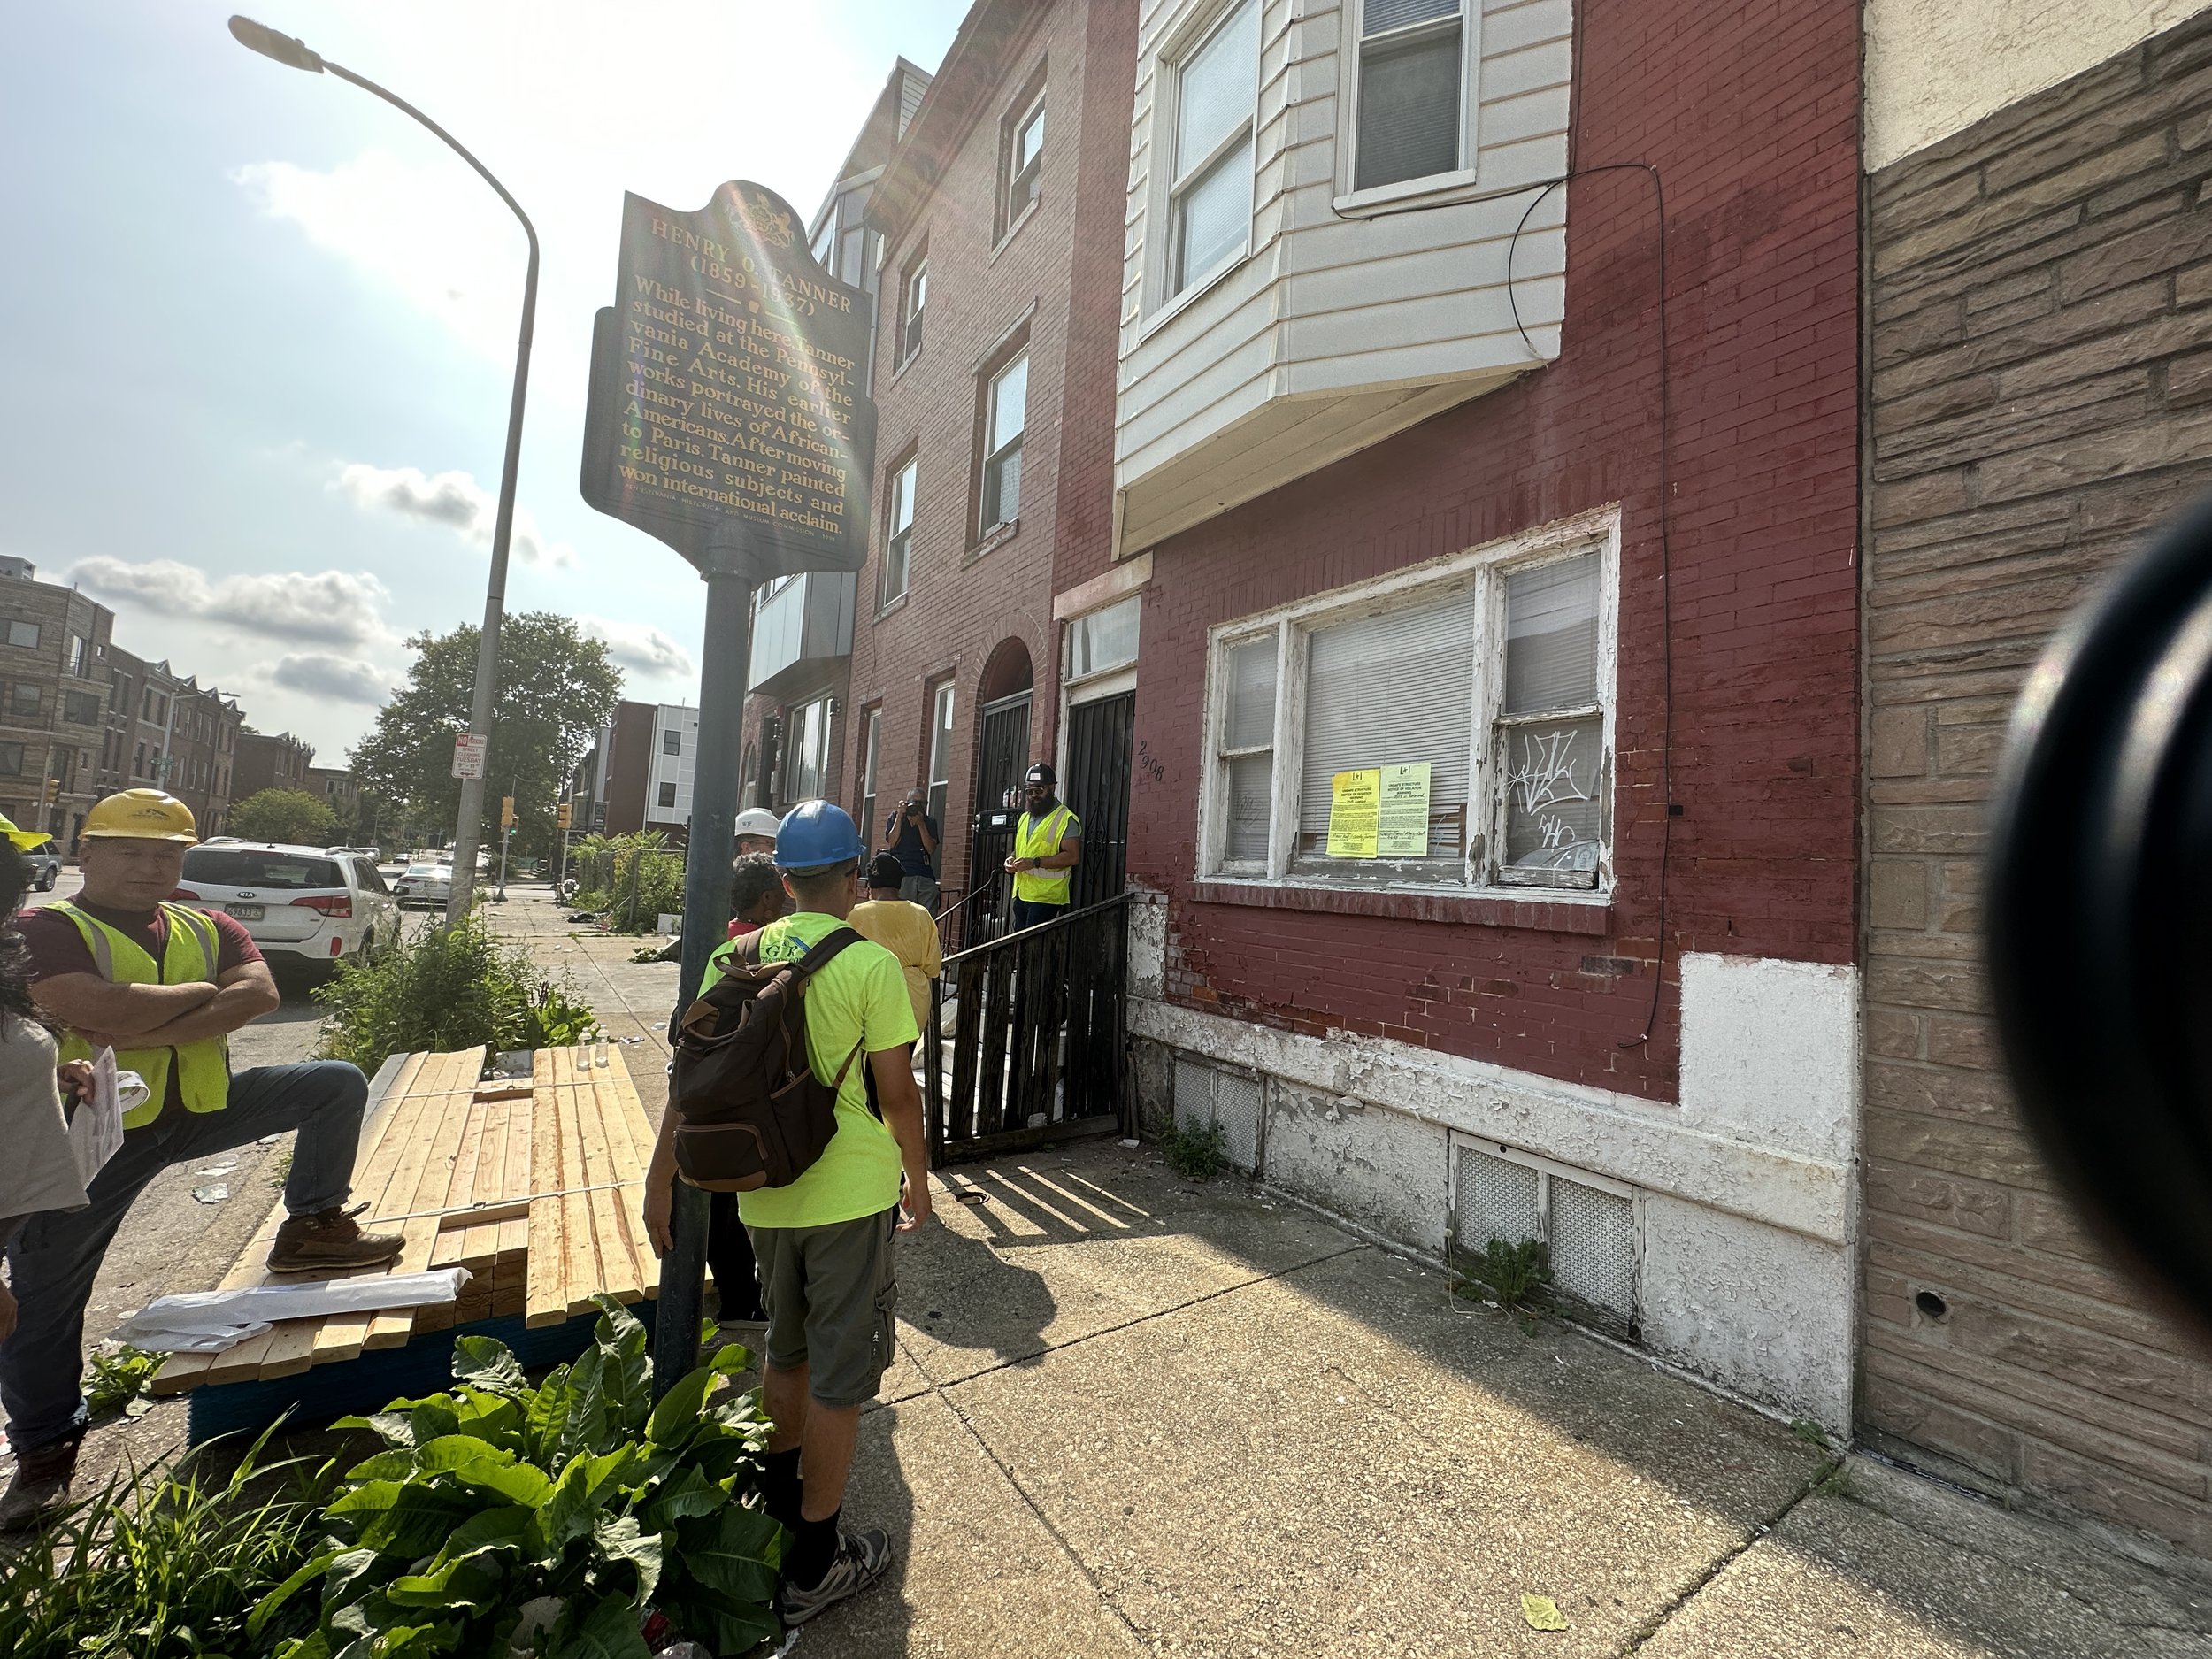 Group of people in hard hats and bright clothing on the sidewalk in front of a brick rowhouse.